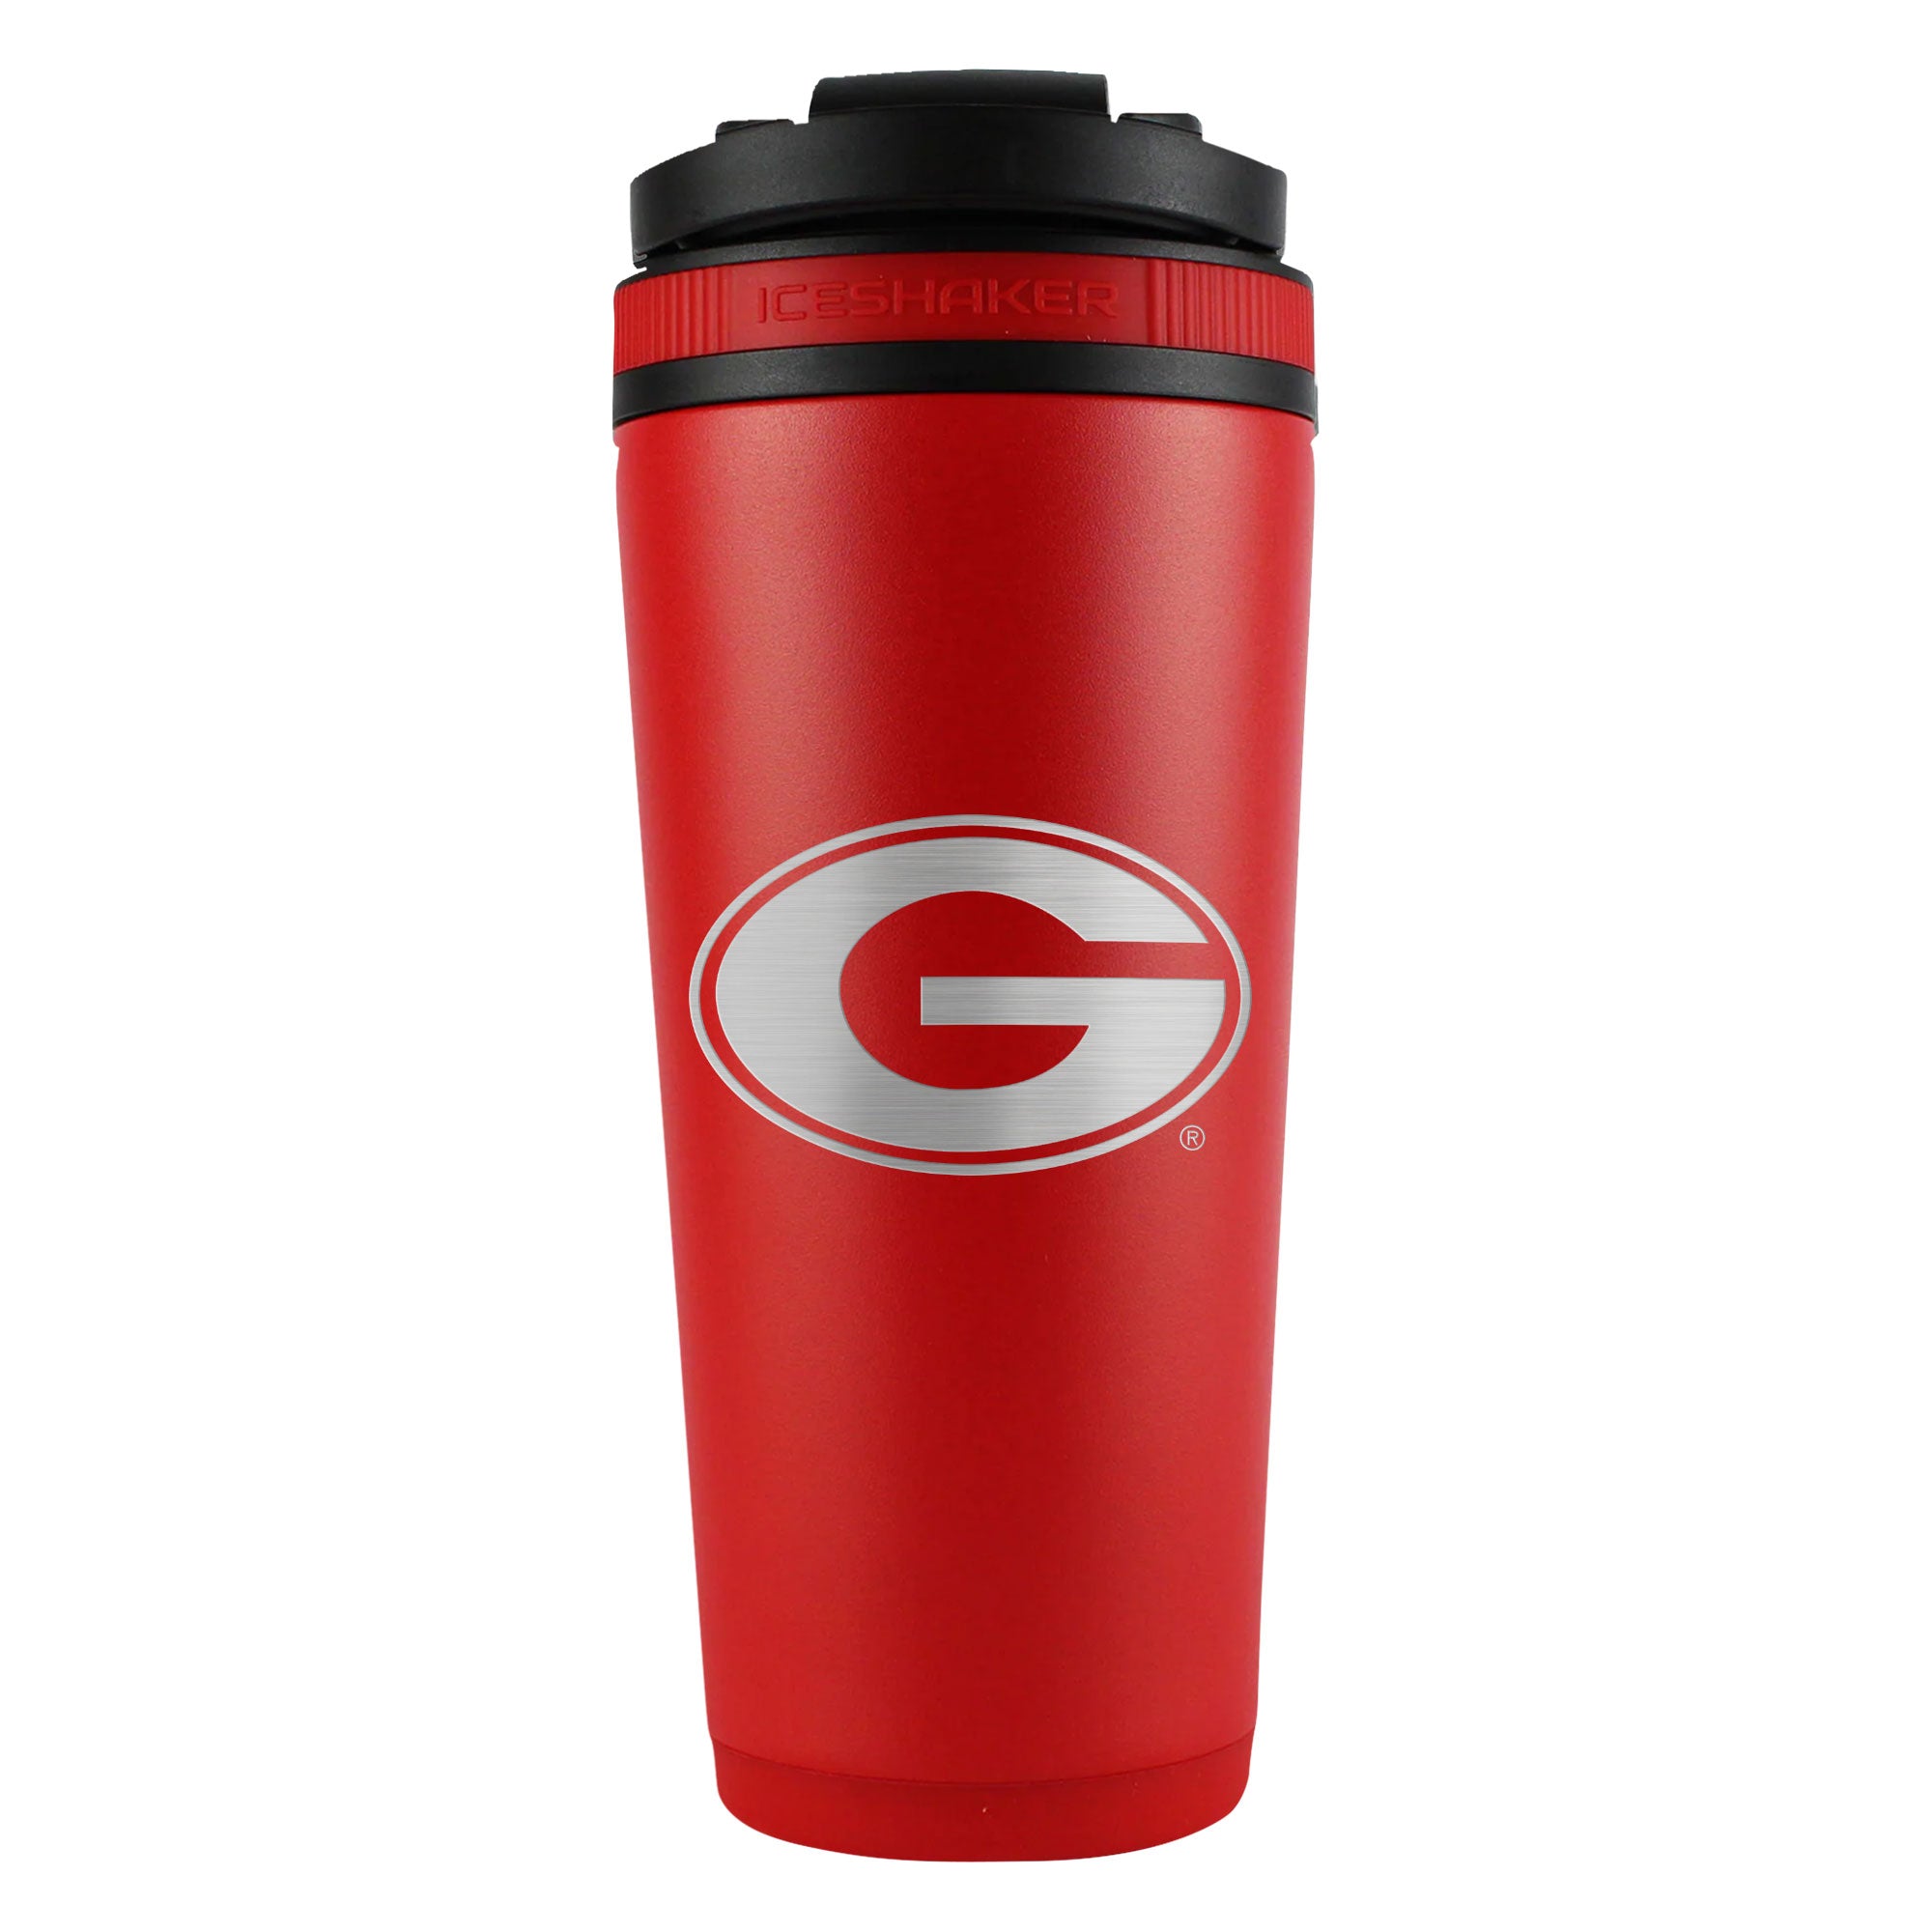 Officially Licensed Georgia State University 26oz Ice Shaker - Red